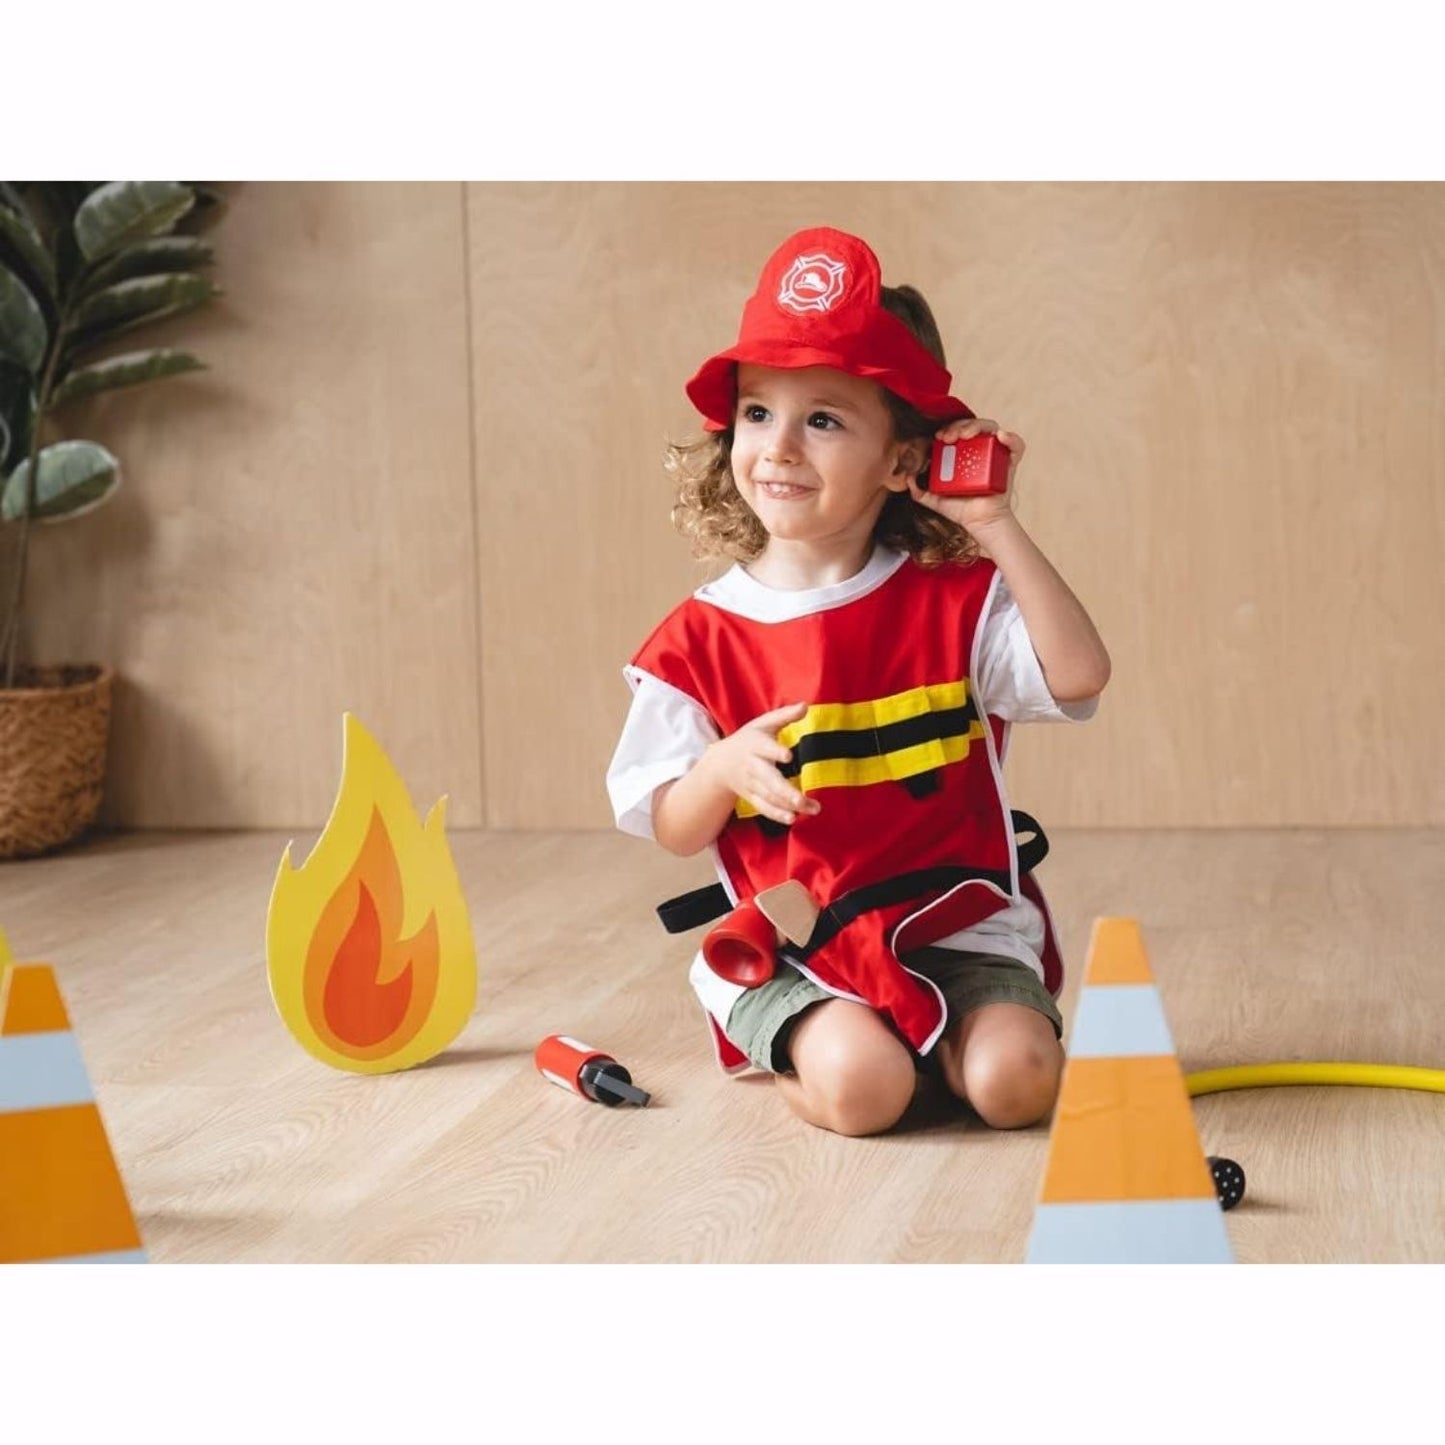 Little girl plays with PlanToys Fire Fighter Play Set